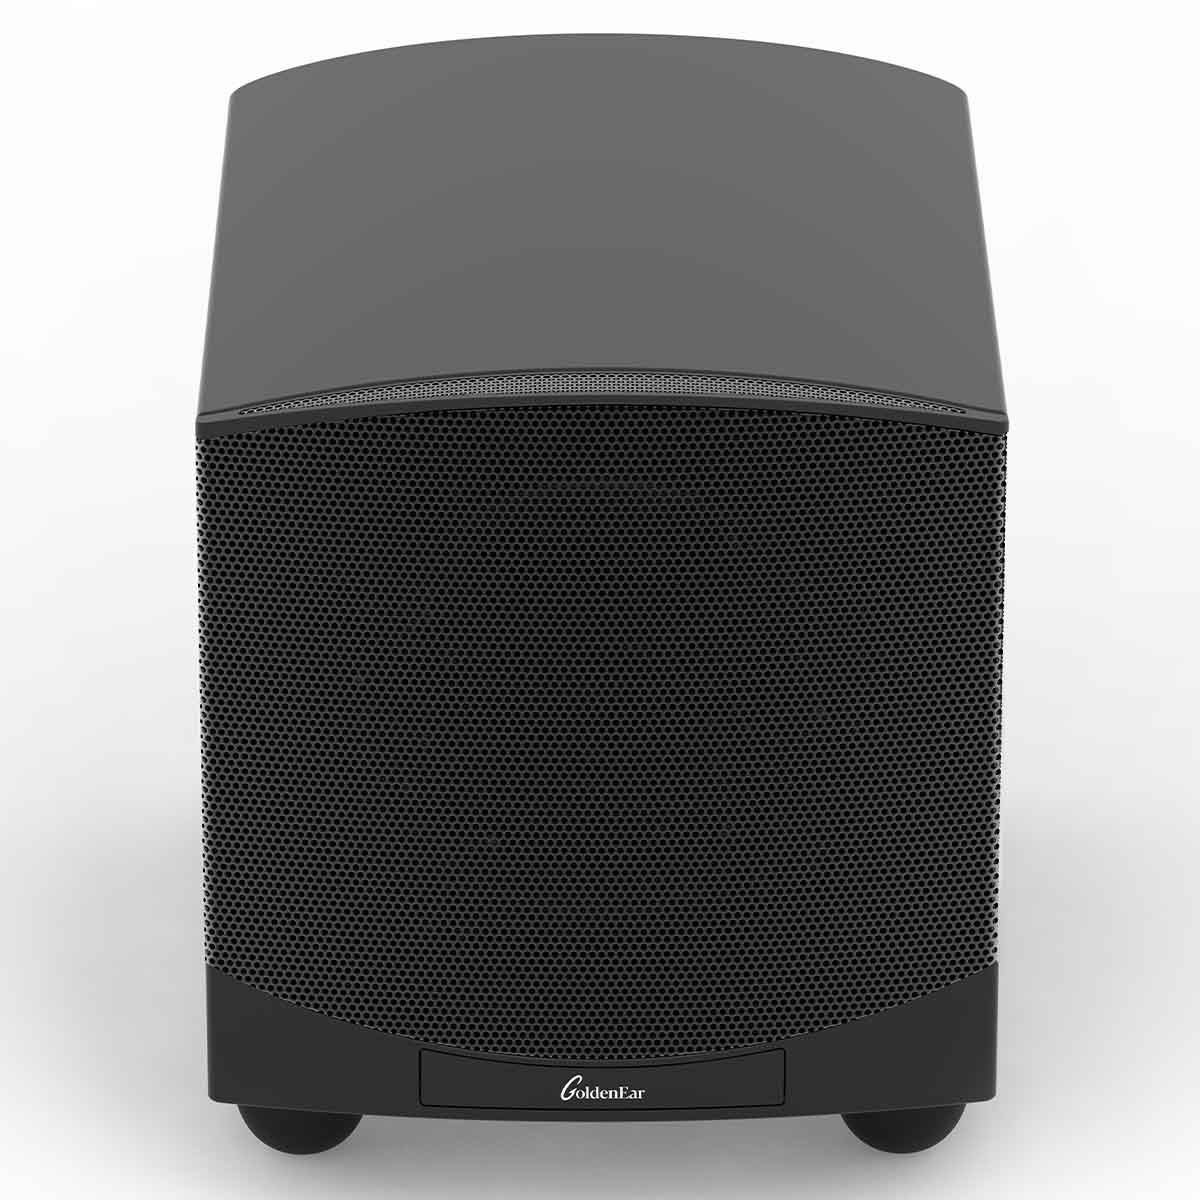 GoldenEar ForceField 40 - 10” Compact Subwoofer - Black - front view